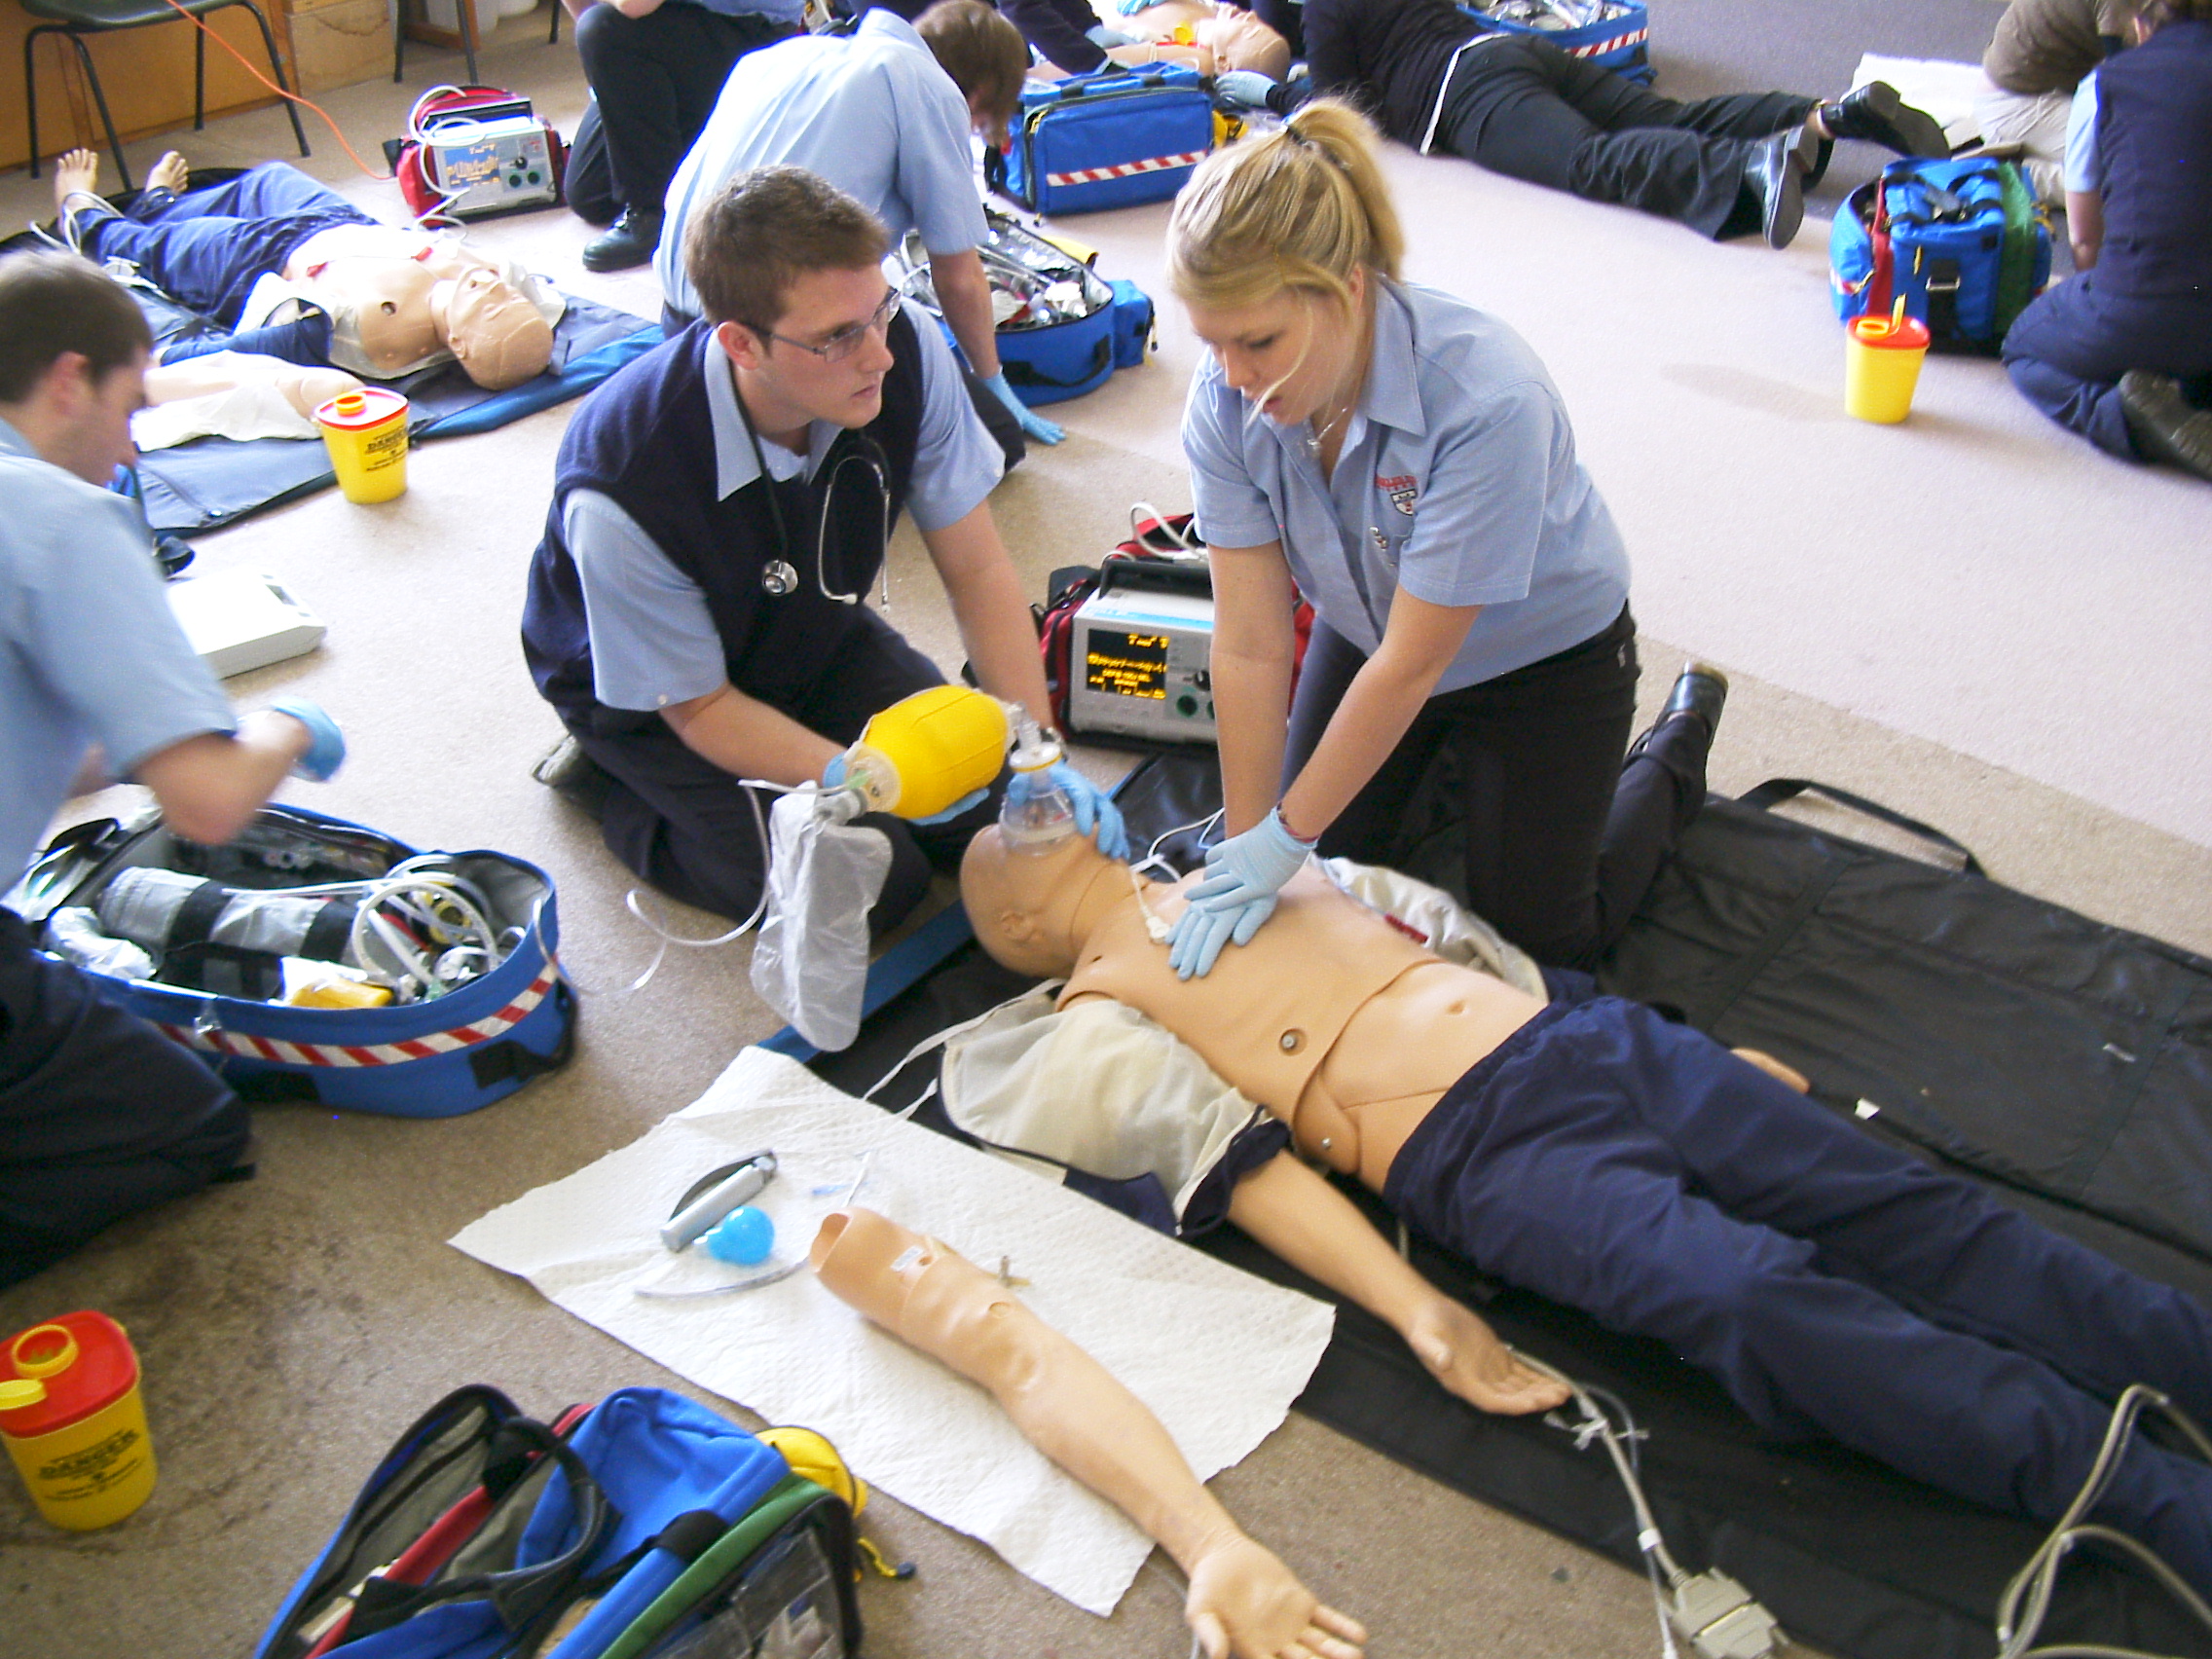 How To Become An Emt Paramedic